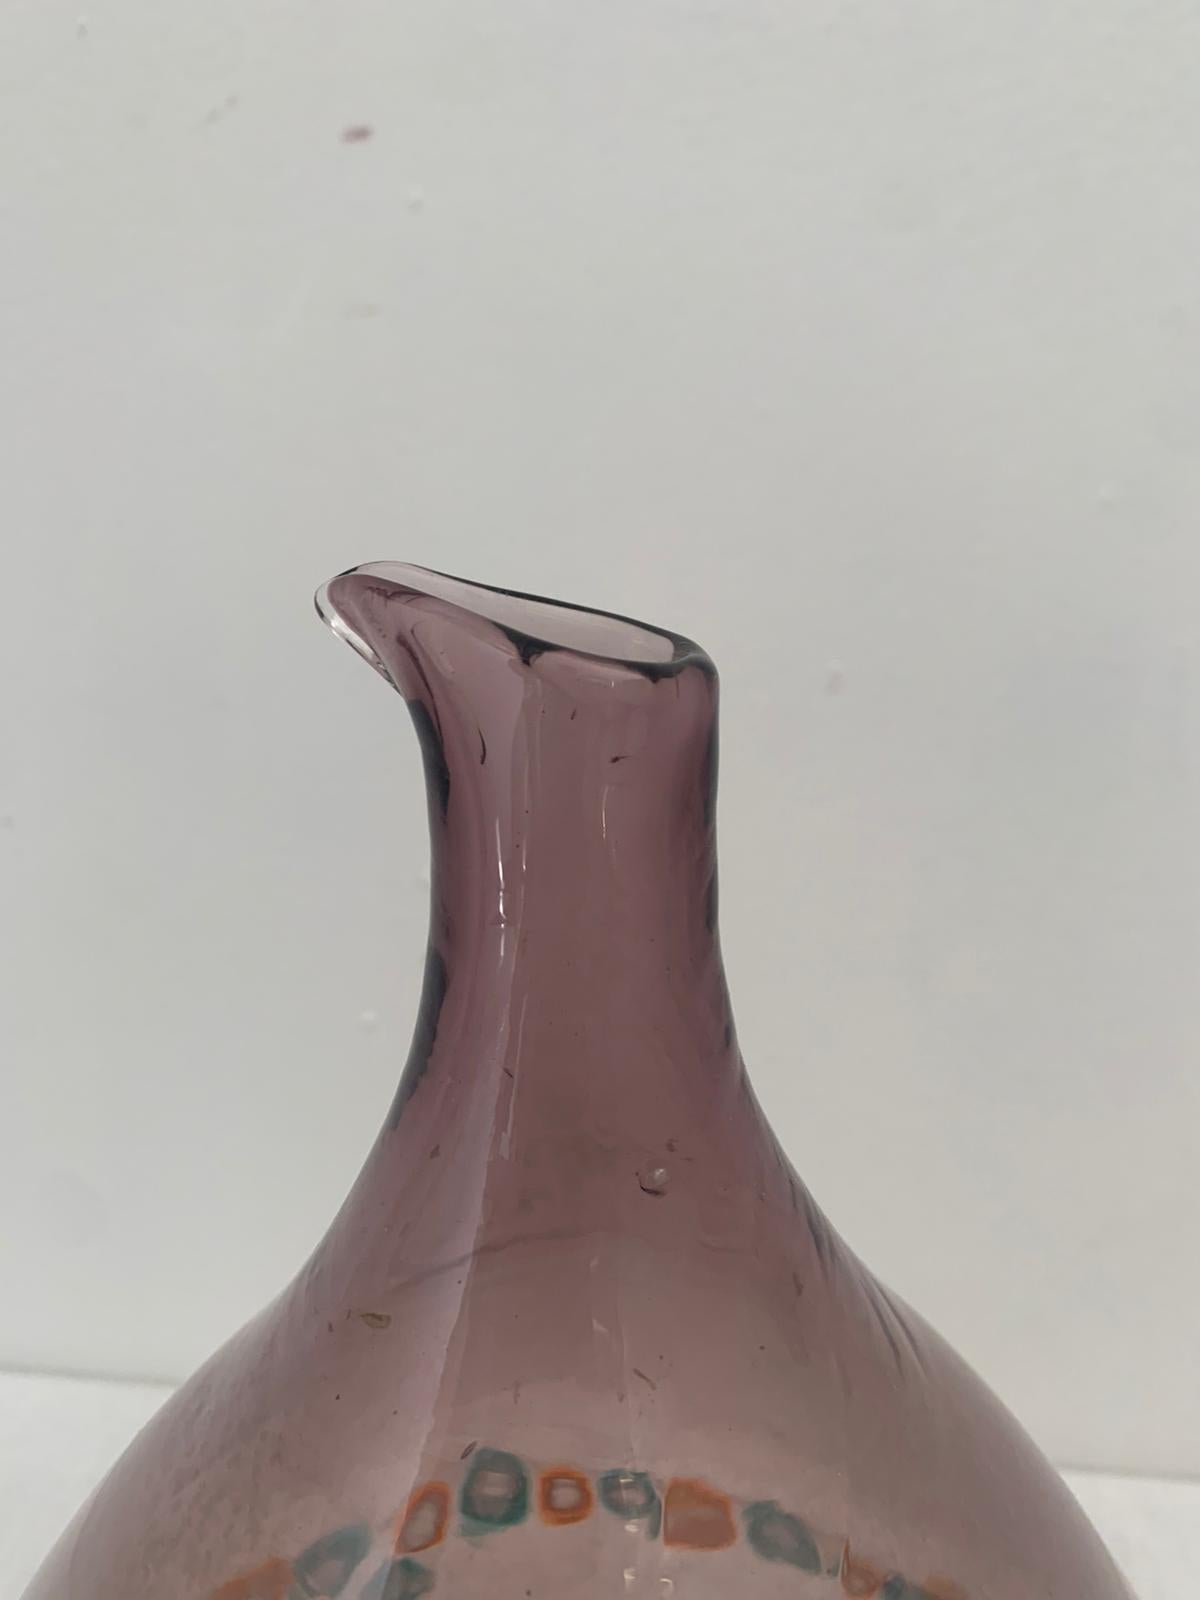 Eggplant-colored blown glass truncated cone vase with murrine band. This vintage piece is in near original condition. Marc Heiremans, Art Glass from Murano, Arnoldsche ed. 1993, page 251.
Packaging with bubble wrap and cardboard boxes is included.